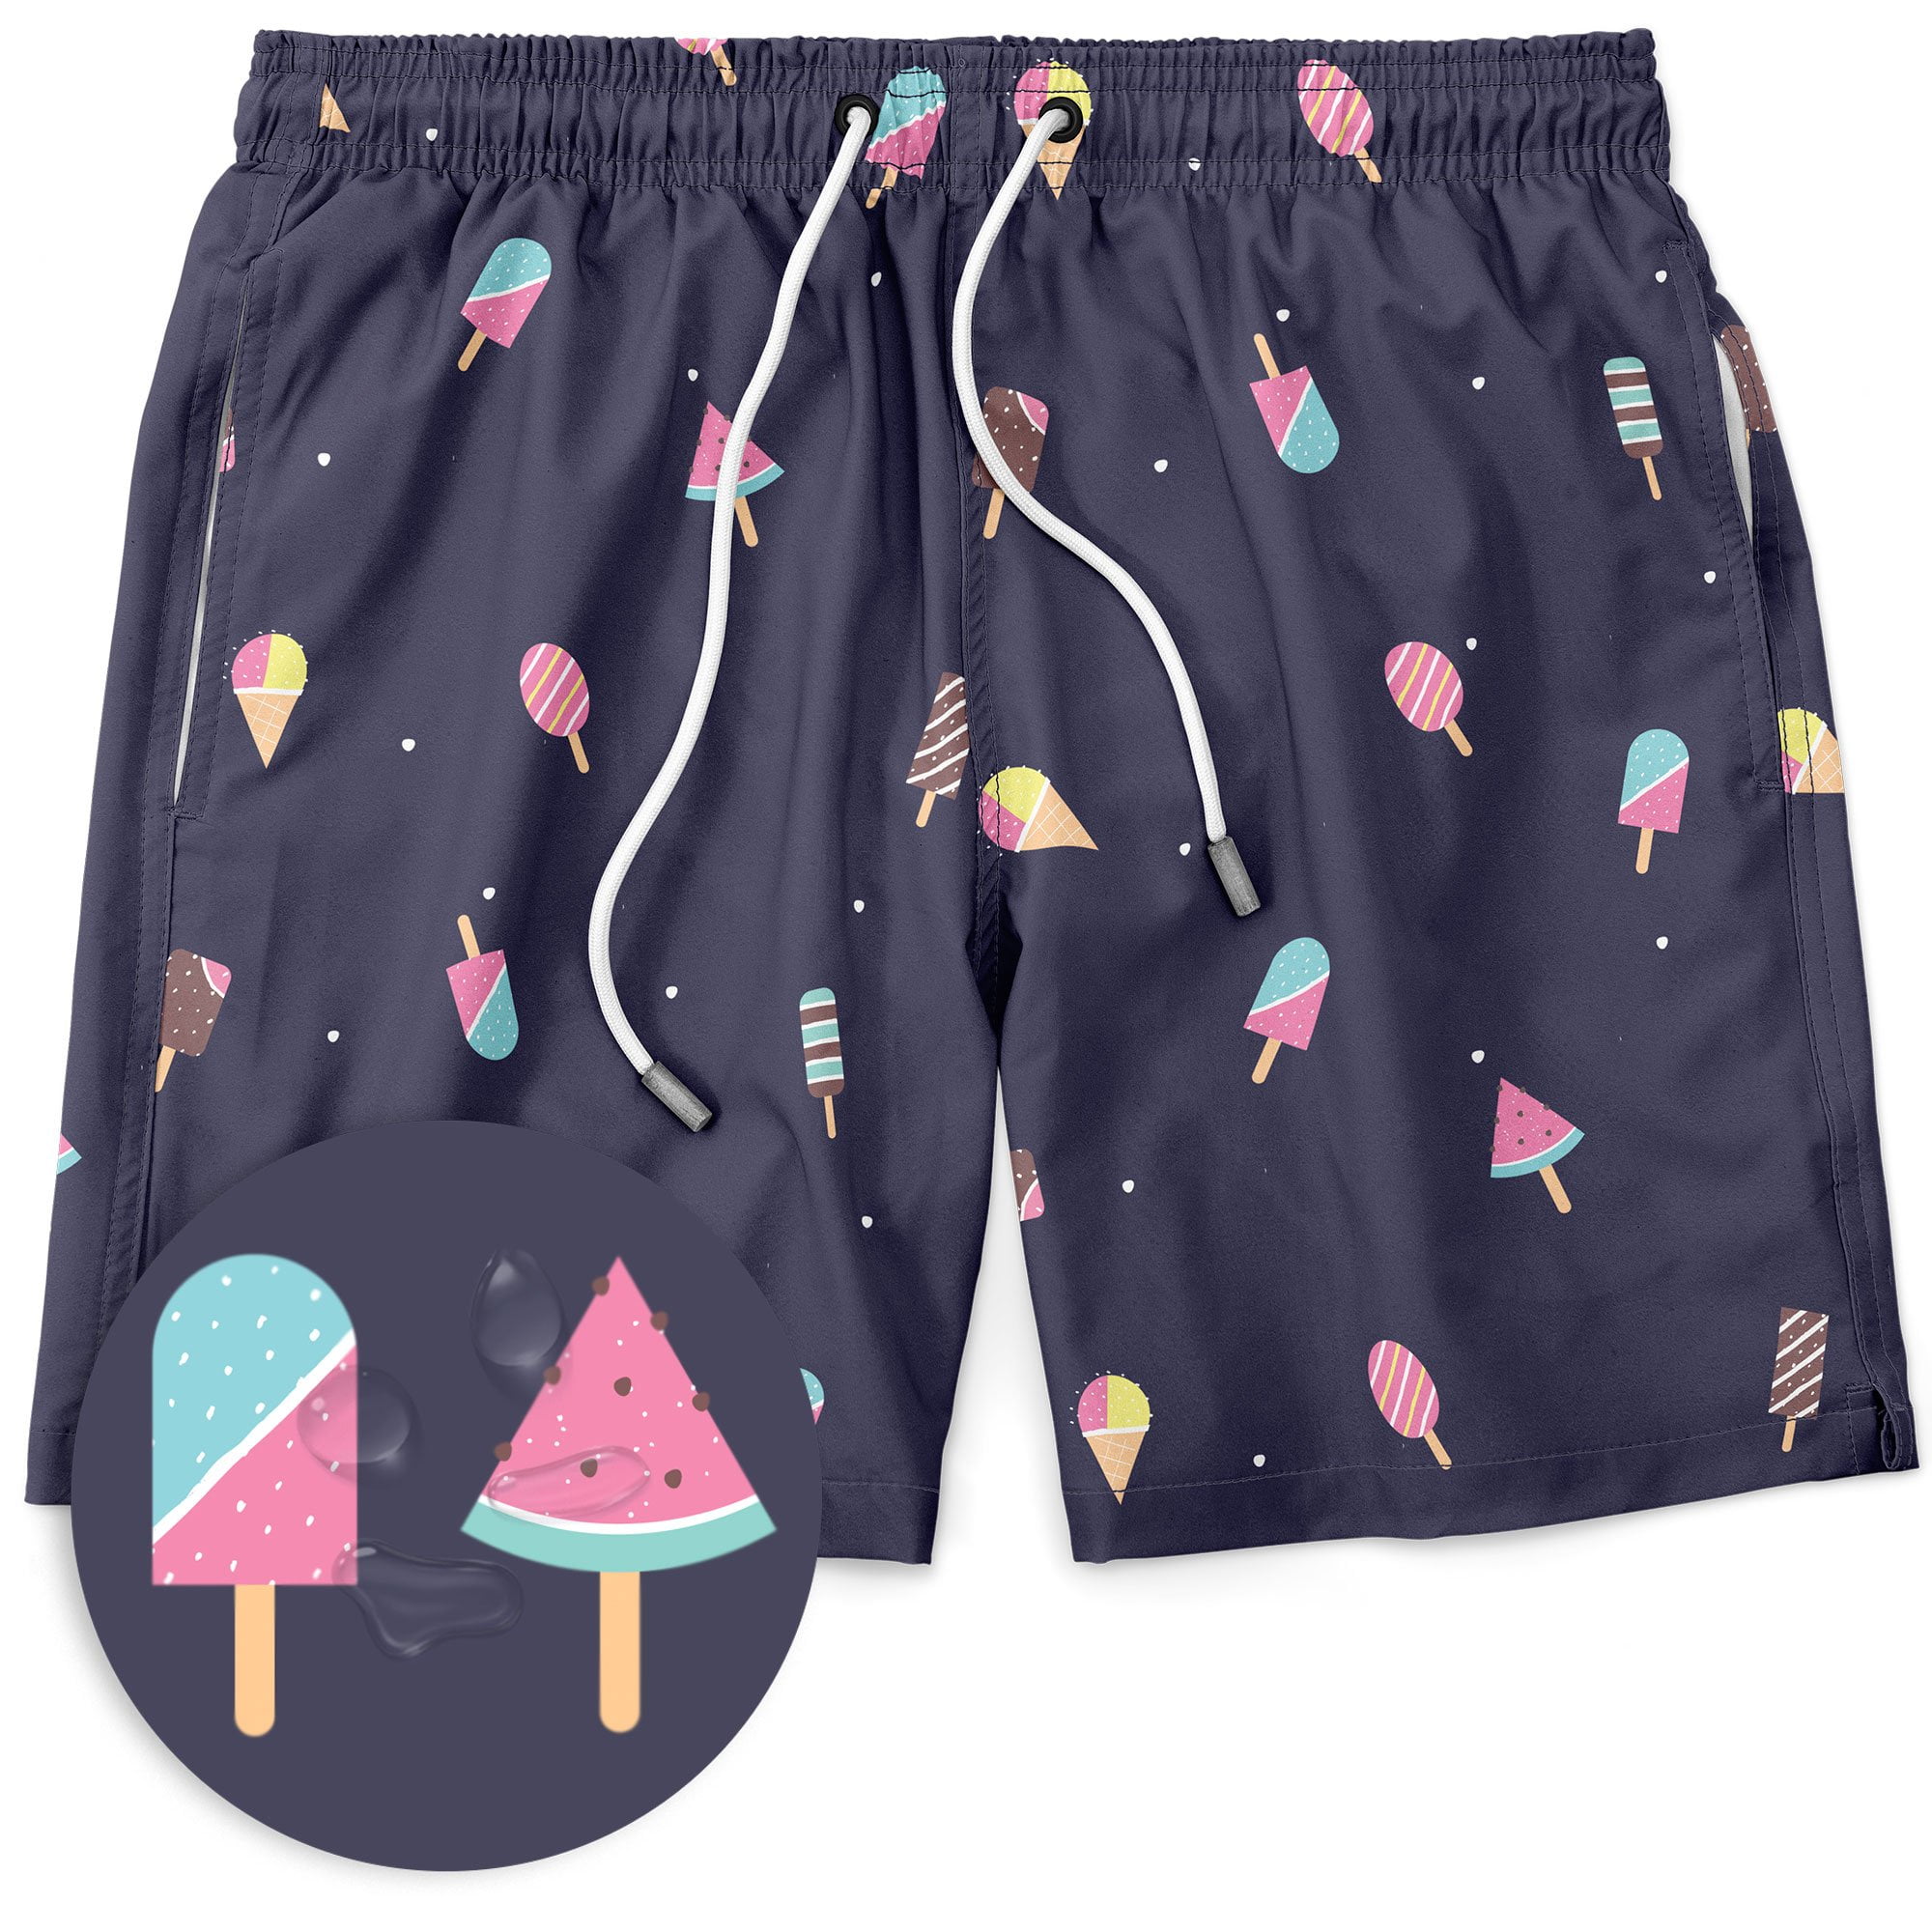 Mens Duck And Cover Printed Stylish Mesh Lined Swim Shorts Sizes from S to XXL